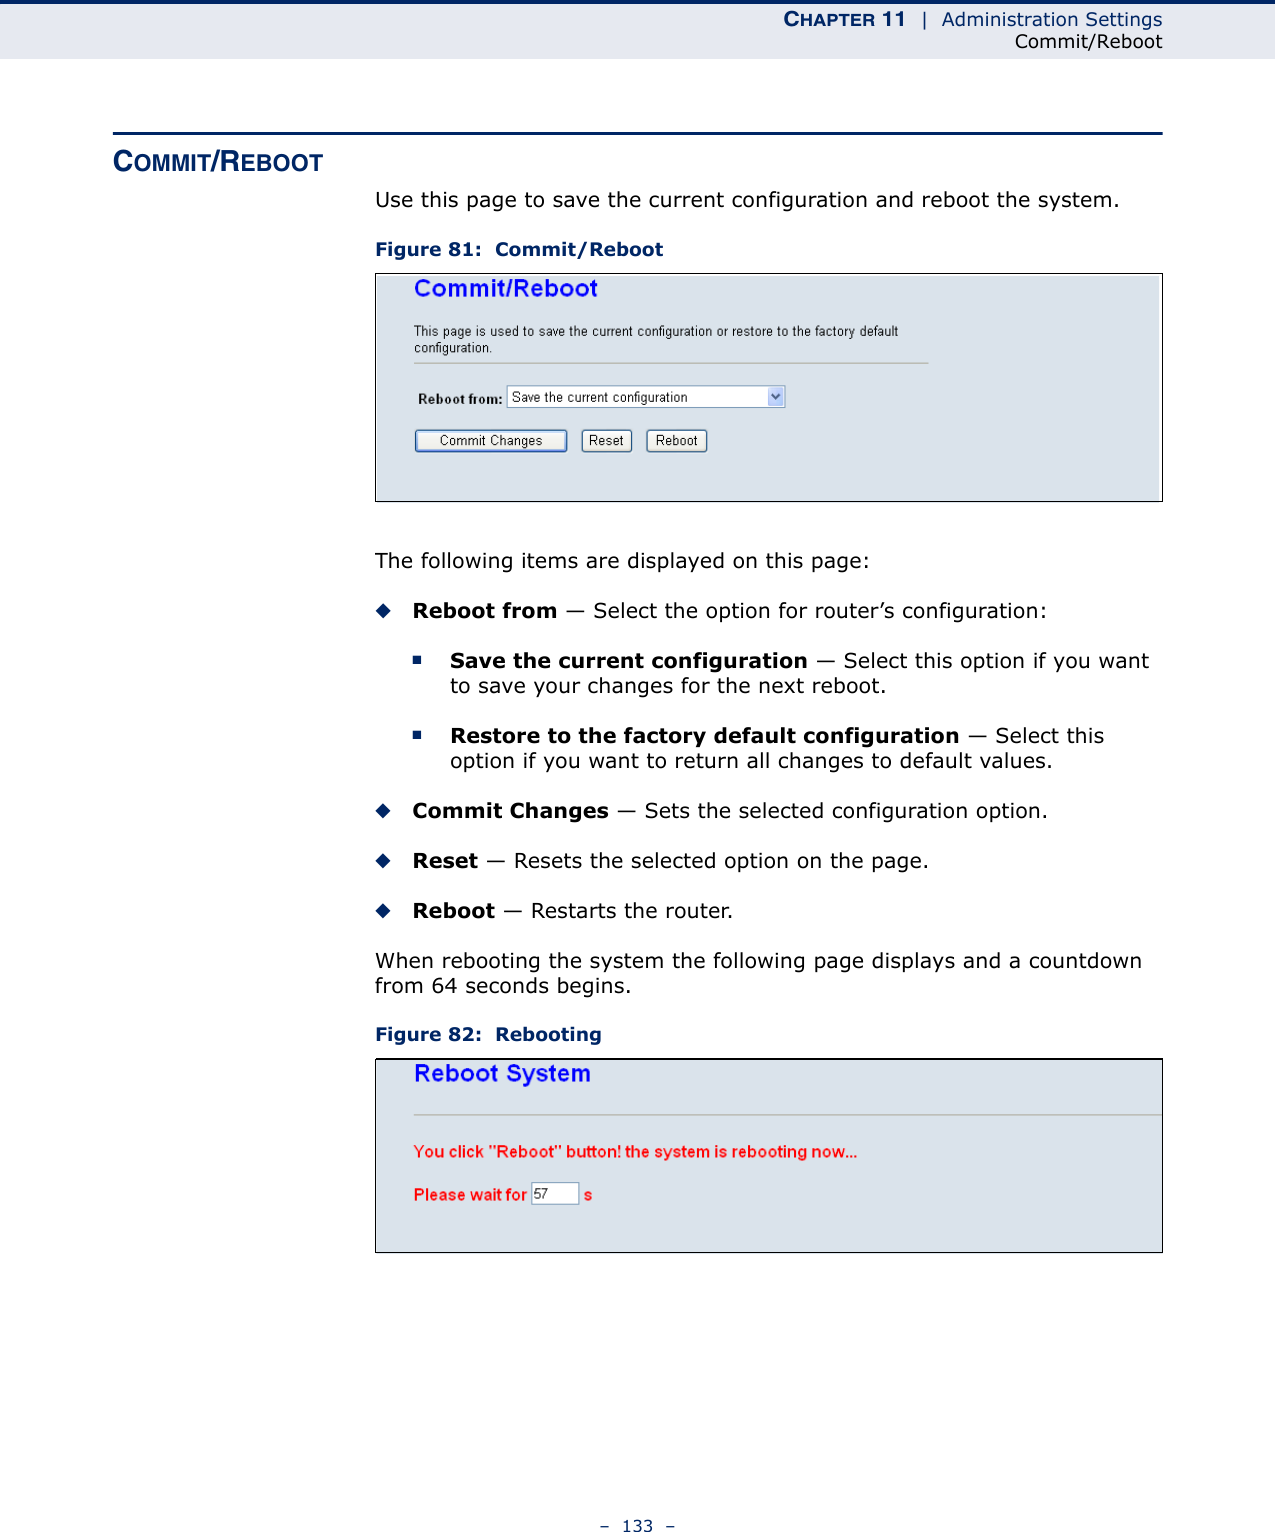 CHAPTER 11  |  Administration SettingsCommit/Reboot–  133  –COMMIT/REBOOTUse this page to save the current configuration and reboot the system.Figure 81:  Commit/RebootThe following items are displayed on this page:◆Reboot from — Select the option for router’s configuration:■Save the current configuration — Select this option if you want to save your changes for the next reboot.■Restore to the factory default configuration — Select this option if you want to return all changes to default values.◆Commit Changes — Sets the selected configuration option.◆Reset — Resets the selected option on the page.◆Reboot — Restarts the router.When rebooting the system the following page displays and a countdown from 64 seconds begins.Figure 82:  Rebooting